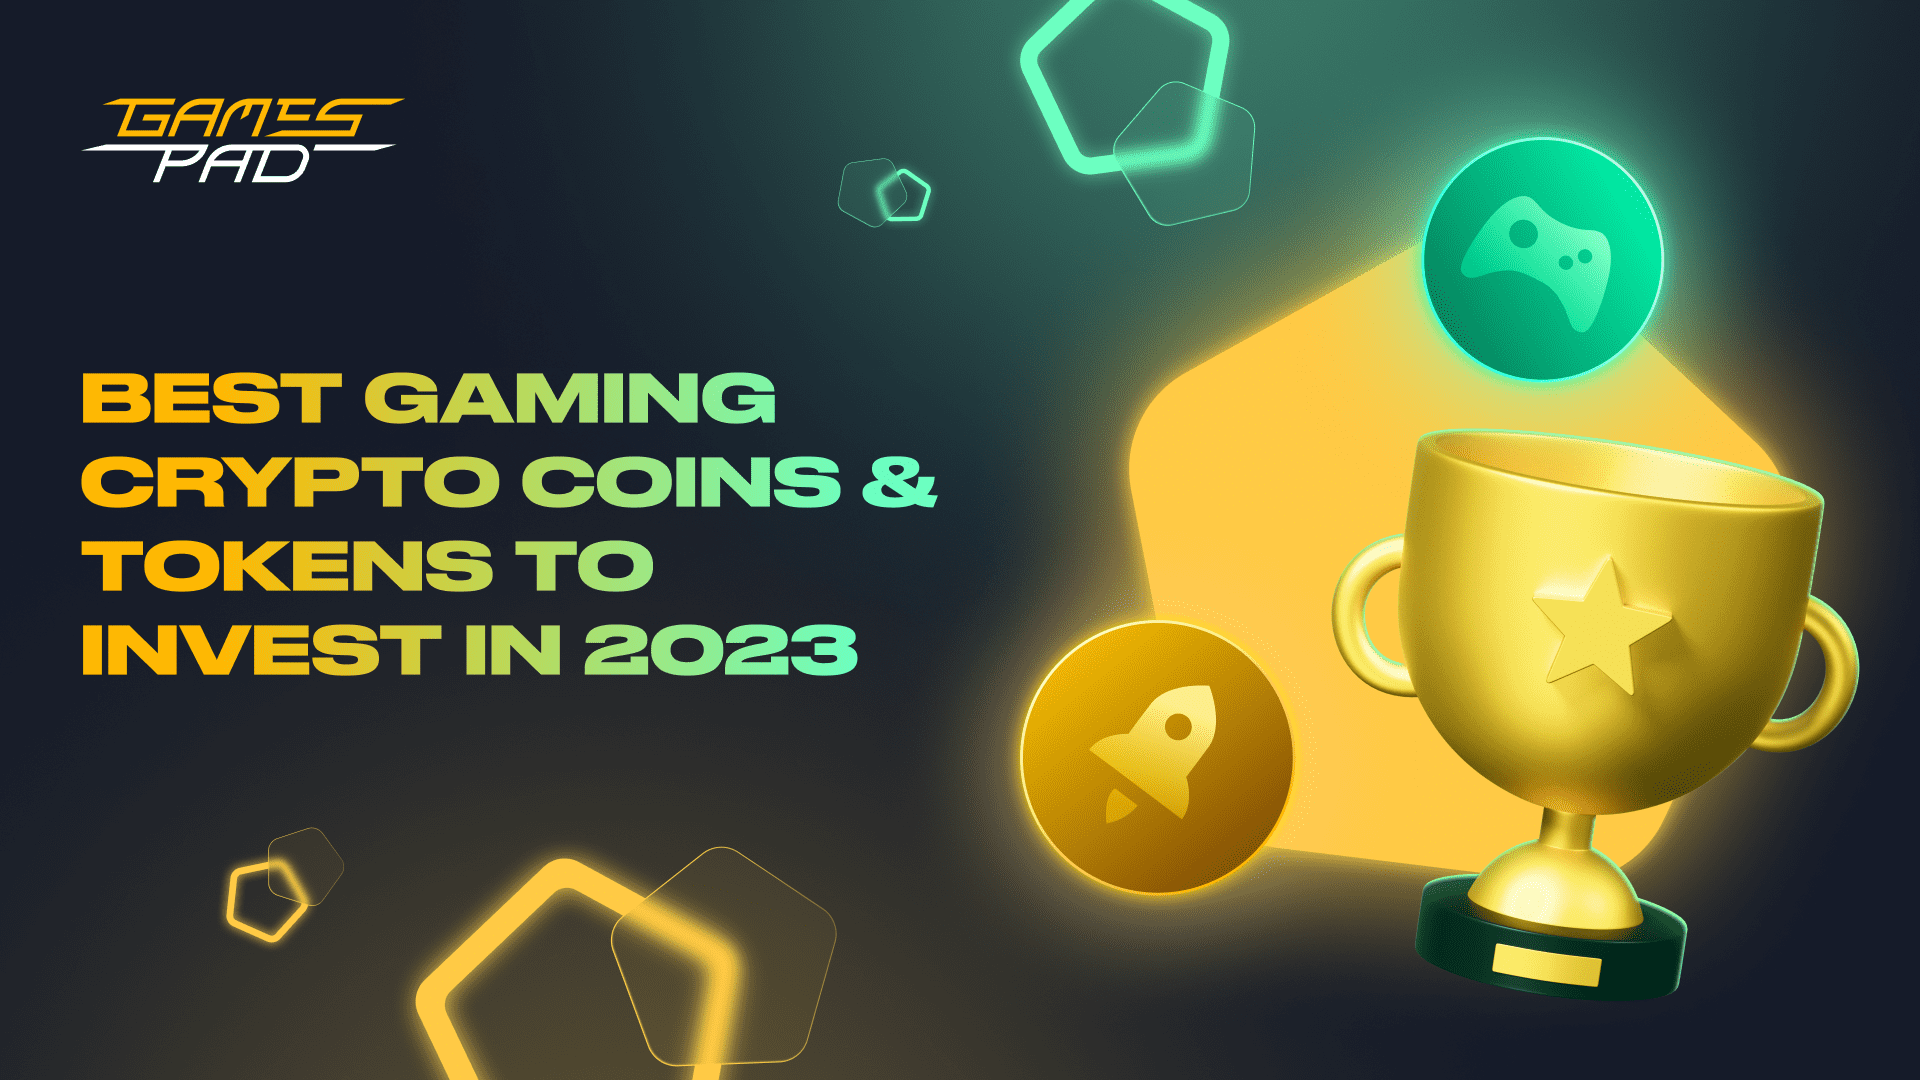 Best Gaming Crypto Coins & Tokens to Invest In 2023